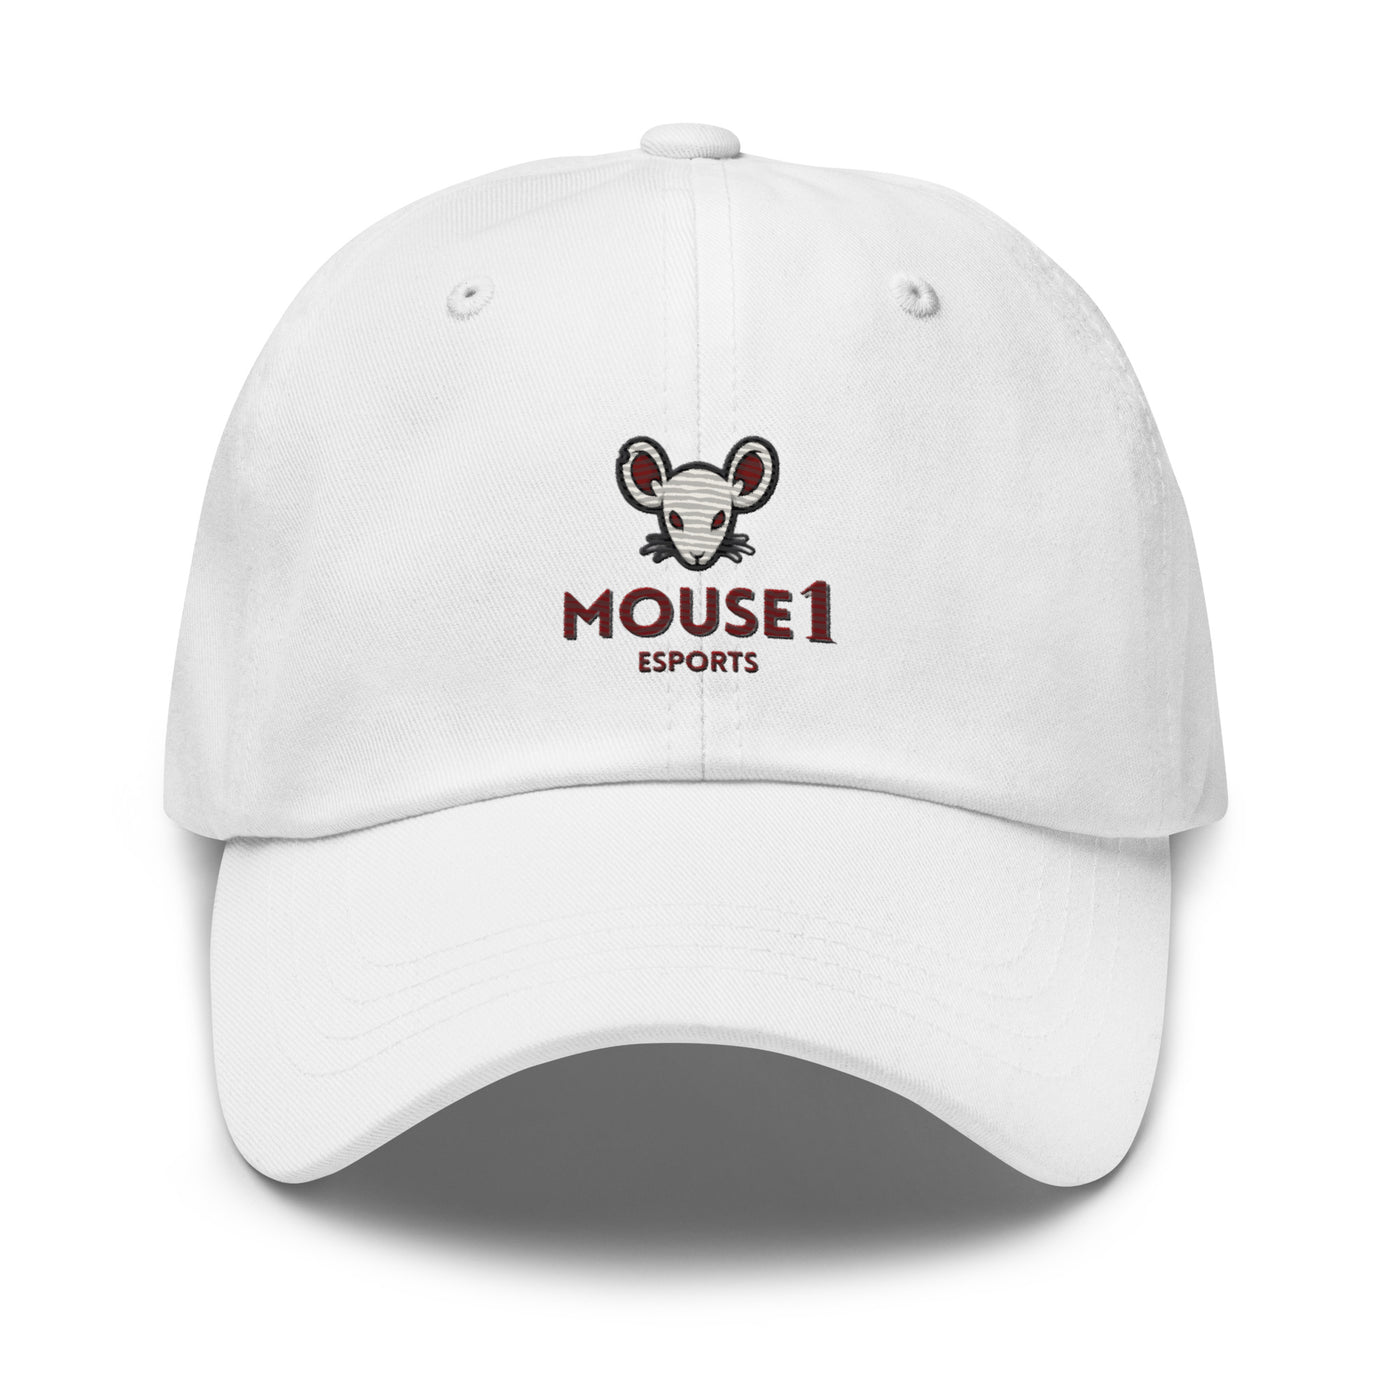 Mouse1 Esports Dad hat